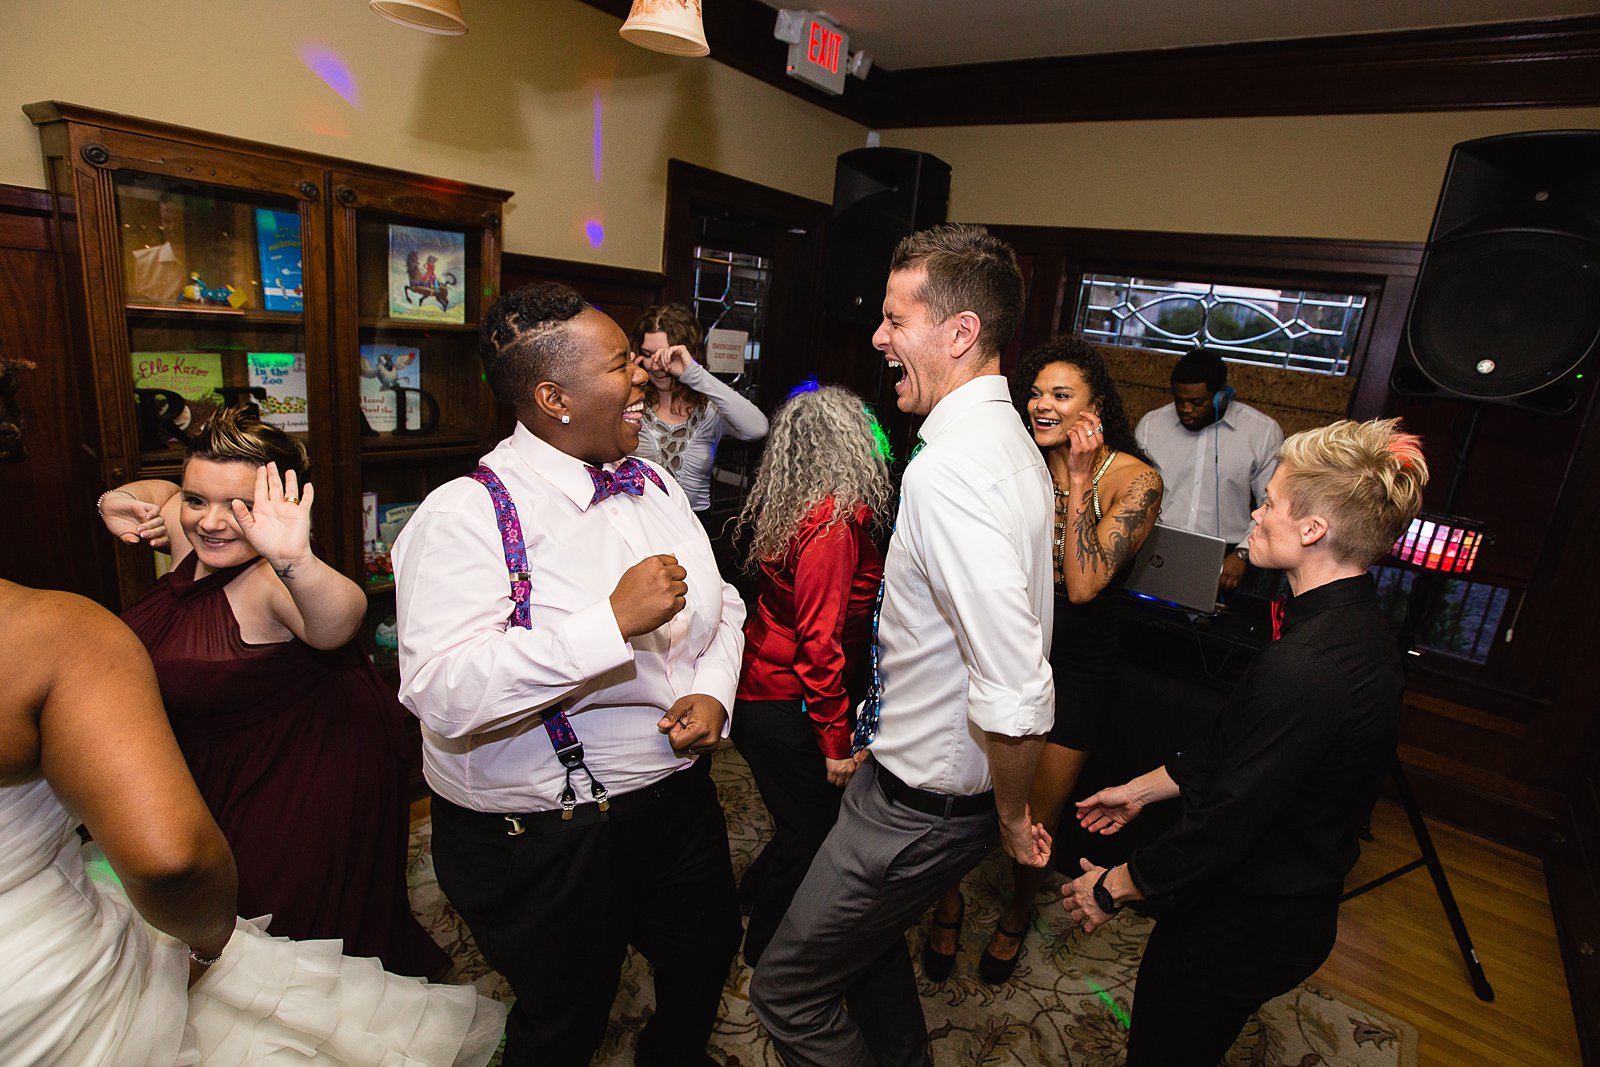 Bride dancing with guests at Ellis-Shackelford House wedding reception by Phoenix wedding photographer PMA Photography